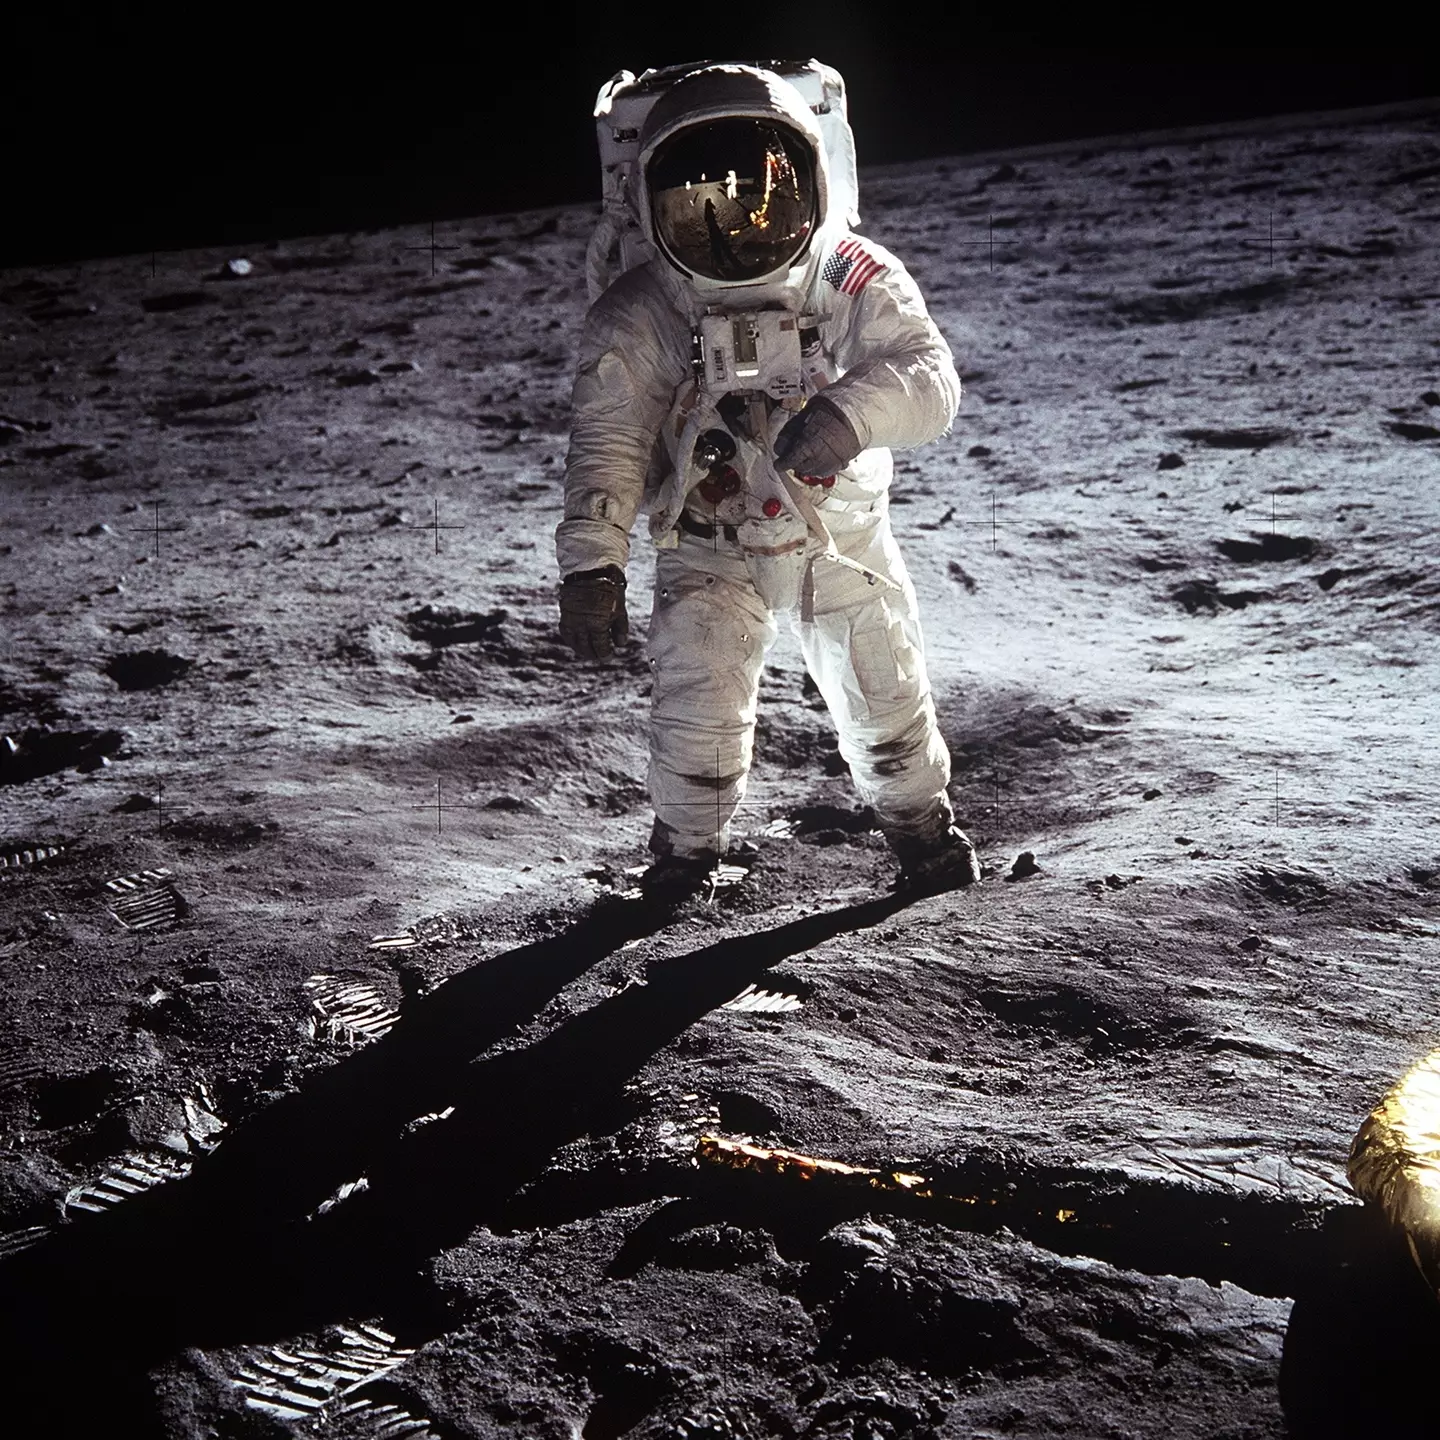 The first question was who was the first man to walk on the moon.